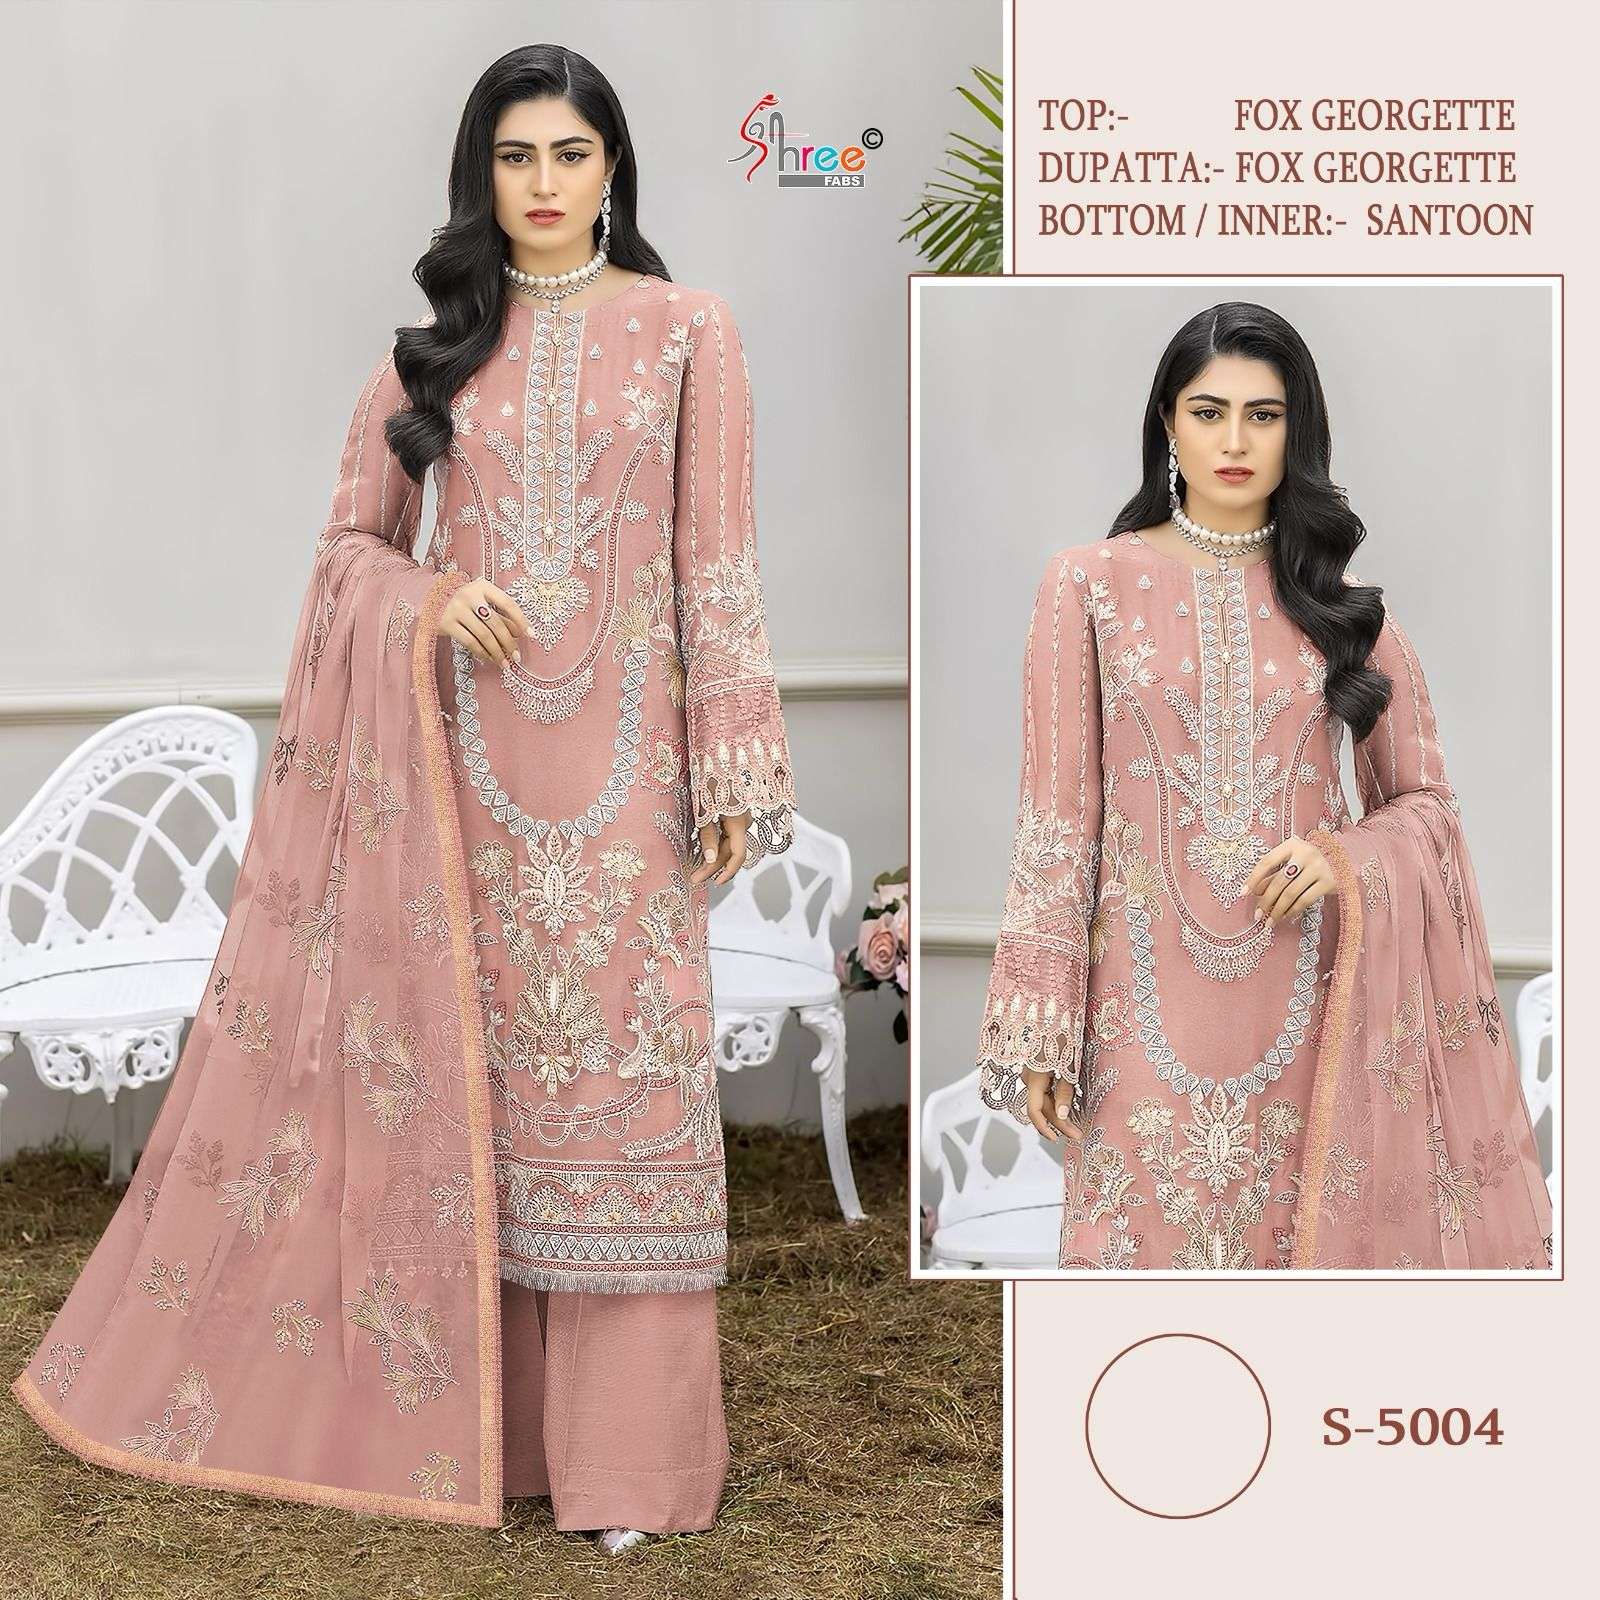 S-5004 COLOURS BY SHREE FABS DESIGNER GEROGETTE EMBROIDERY PAKISTANI DRESSES